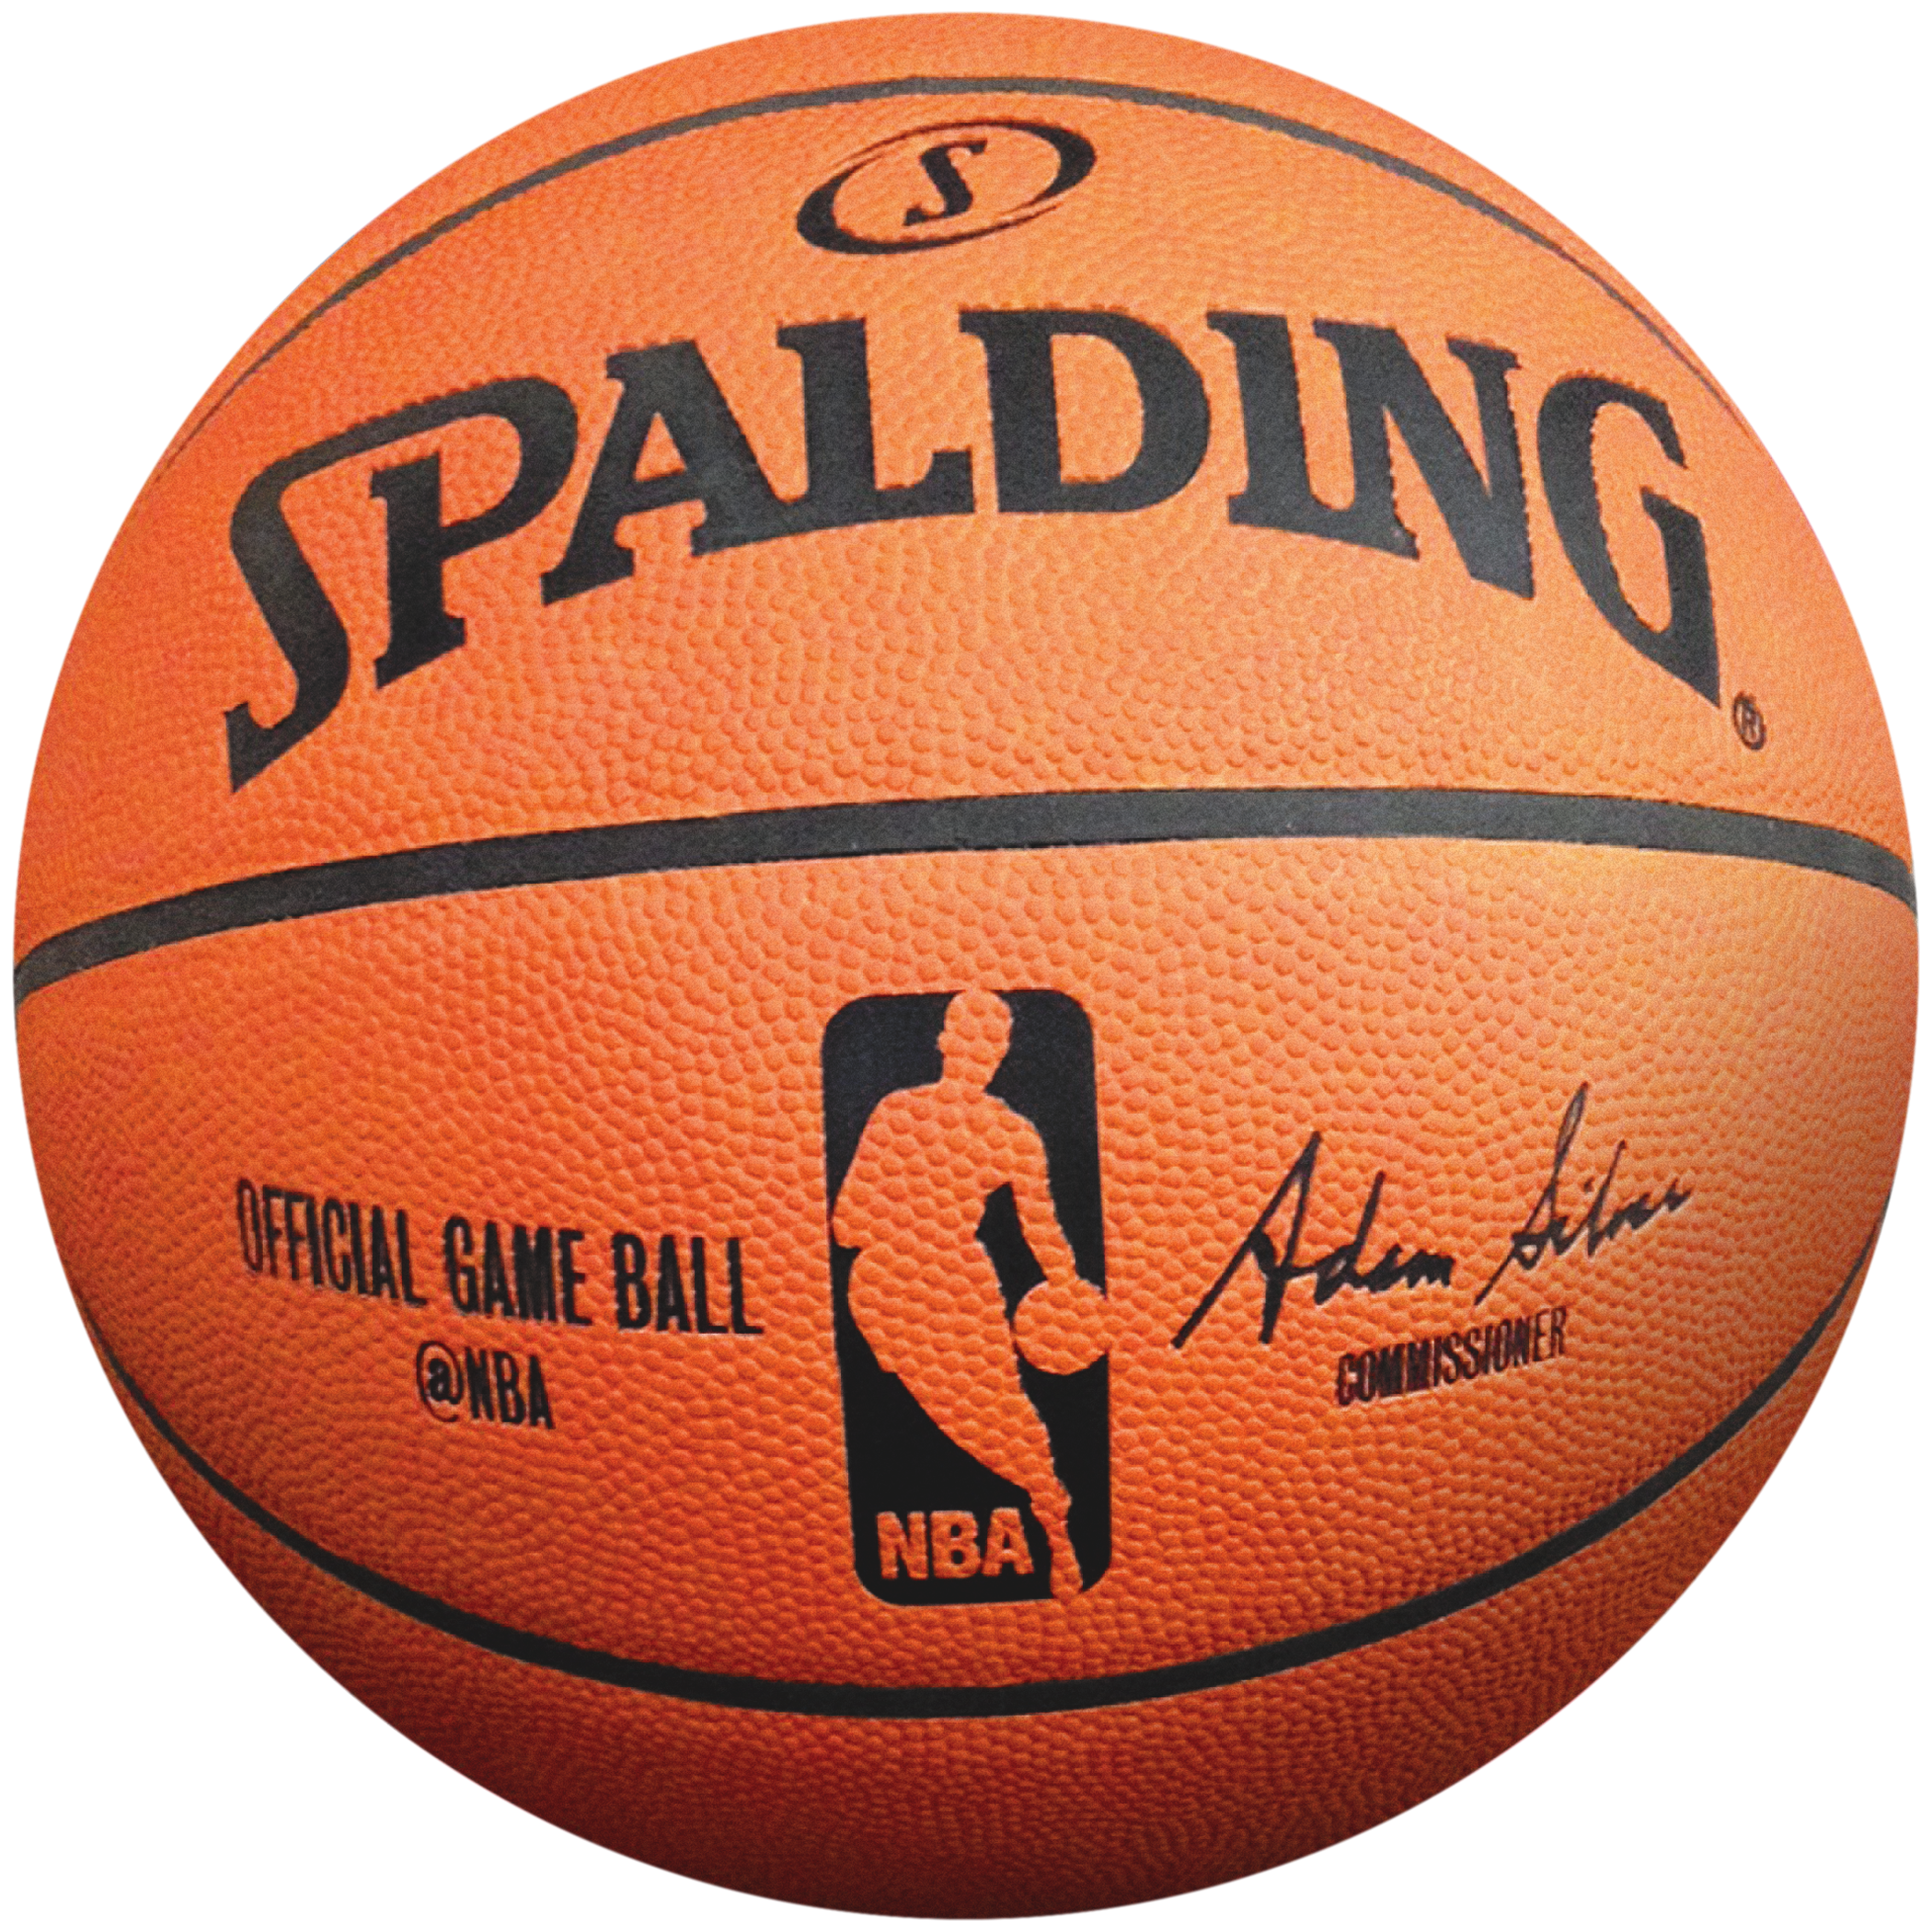 Enter to win a. Wildcat clipart basketball uk